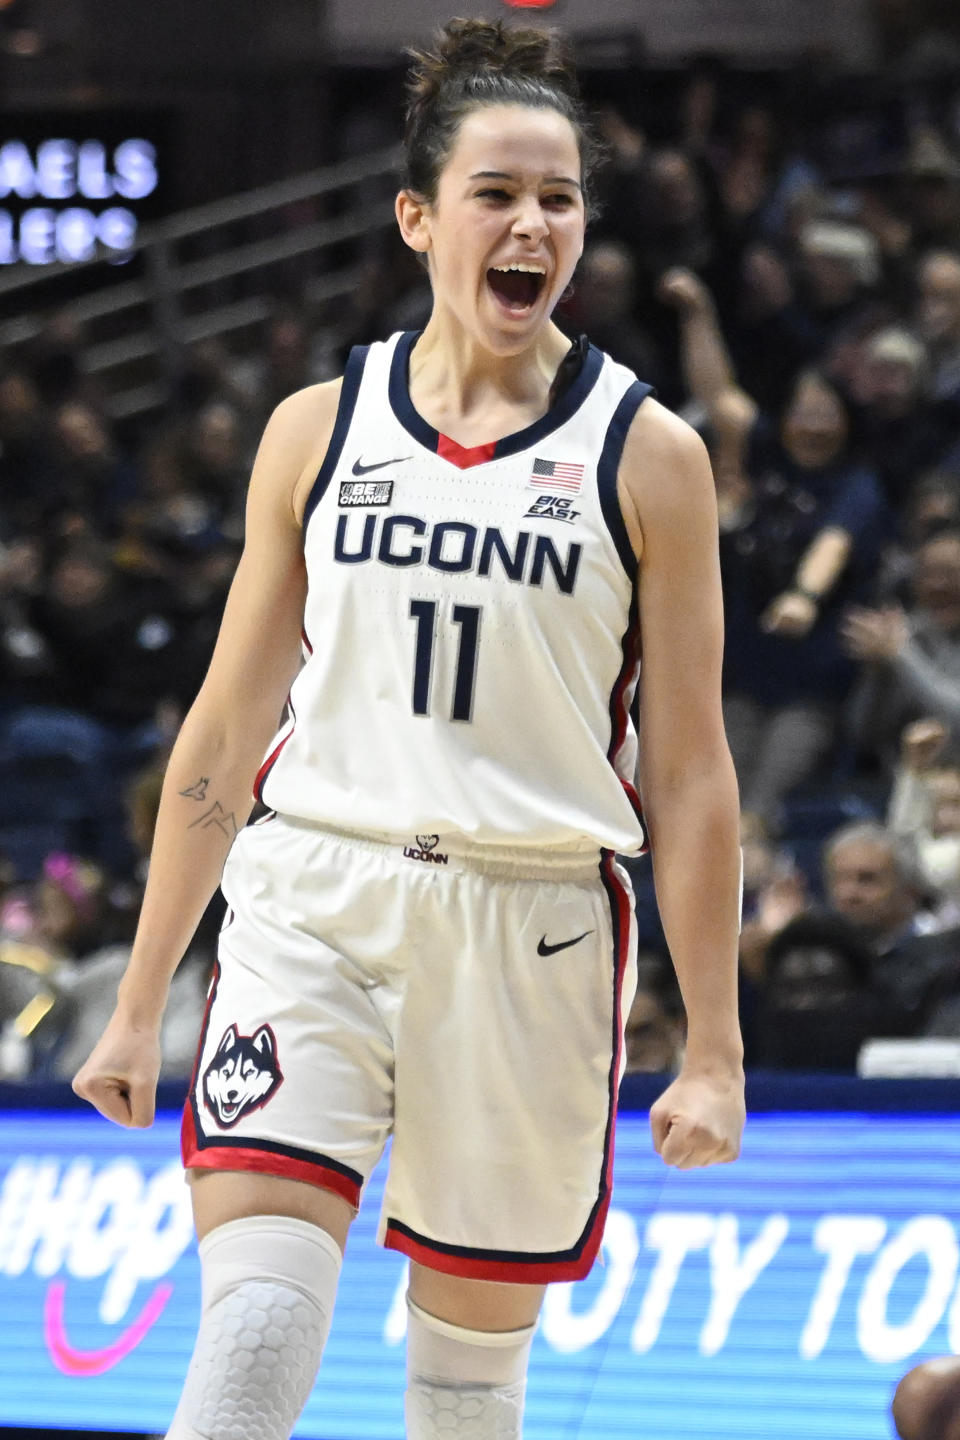 UConn's Lou Lopez-Senechal (11) reacts in the first half of an NCAA college basketball game against DePaul, Monday, Jan. 23, 2023, in Storrs, Conn. (AP Photo/Jessica Hill)